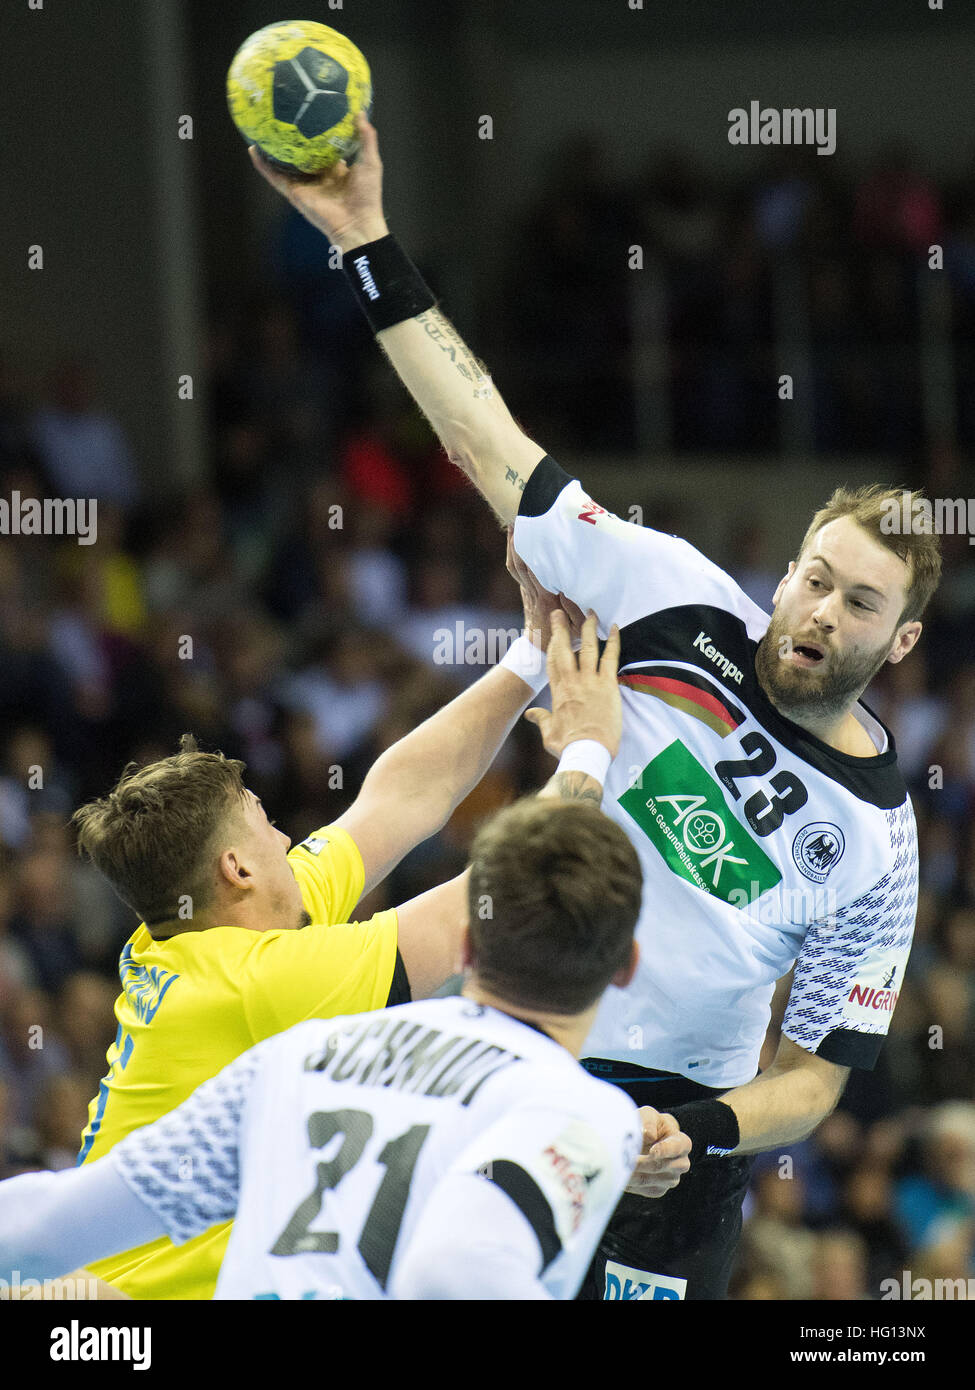 Krefeld, Germany. 03rd Jan, 2017. Romania's Giorgian Cristescu (l) in action against Germany's Steffen Faeth in the national league handball game between Germany and Romania the Koenigpalast in Krefeld, Germany, 03 January 2017. Photo: Marius Becker/dpa/Alamy Live News Stock Photo